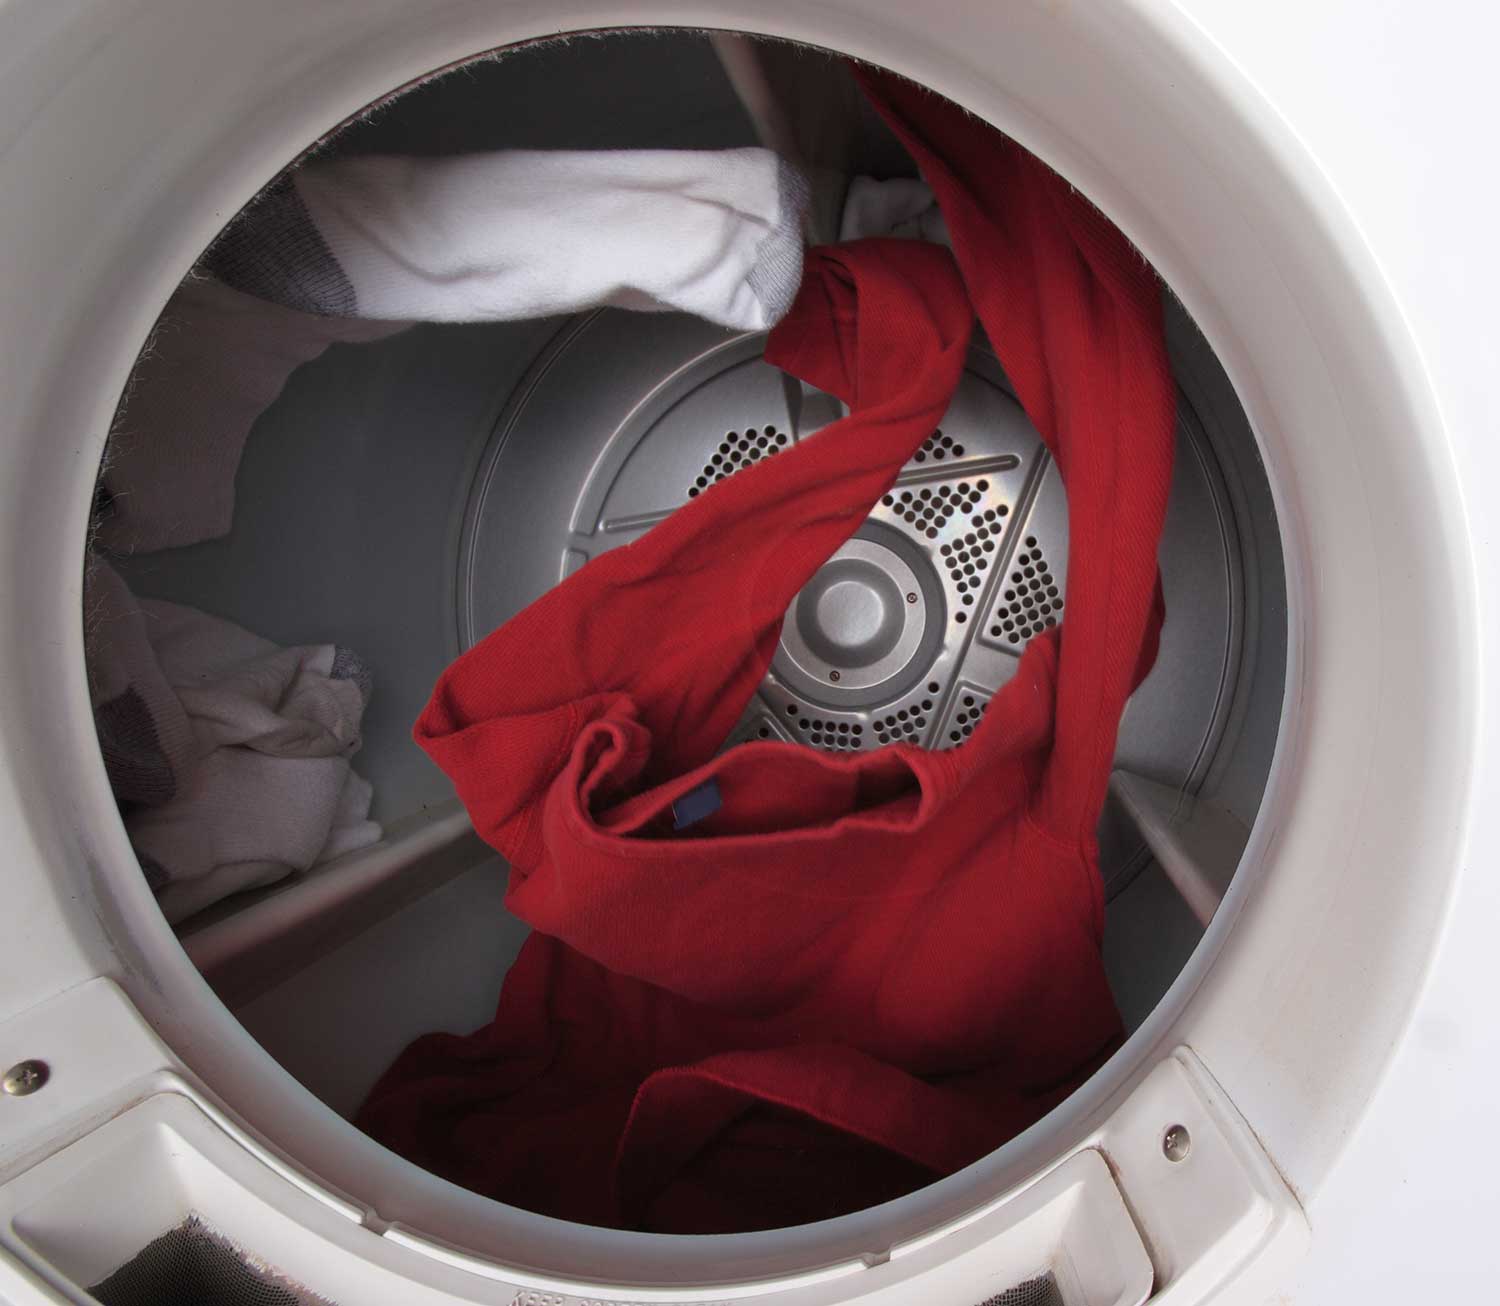 A red shirt and several socks tumble through the air inside a dryer